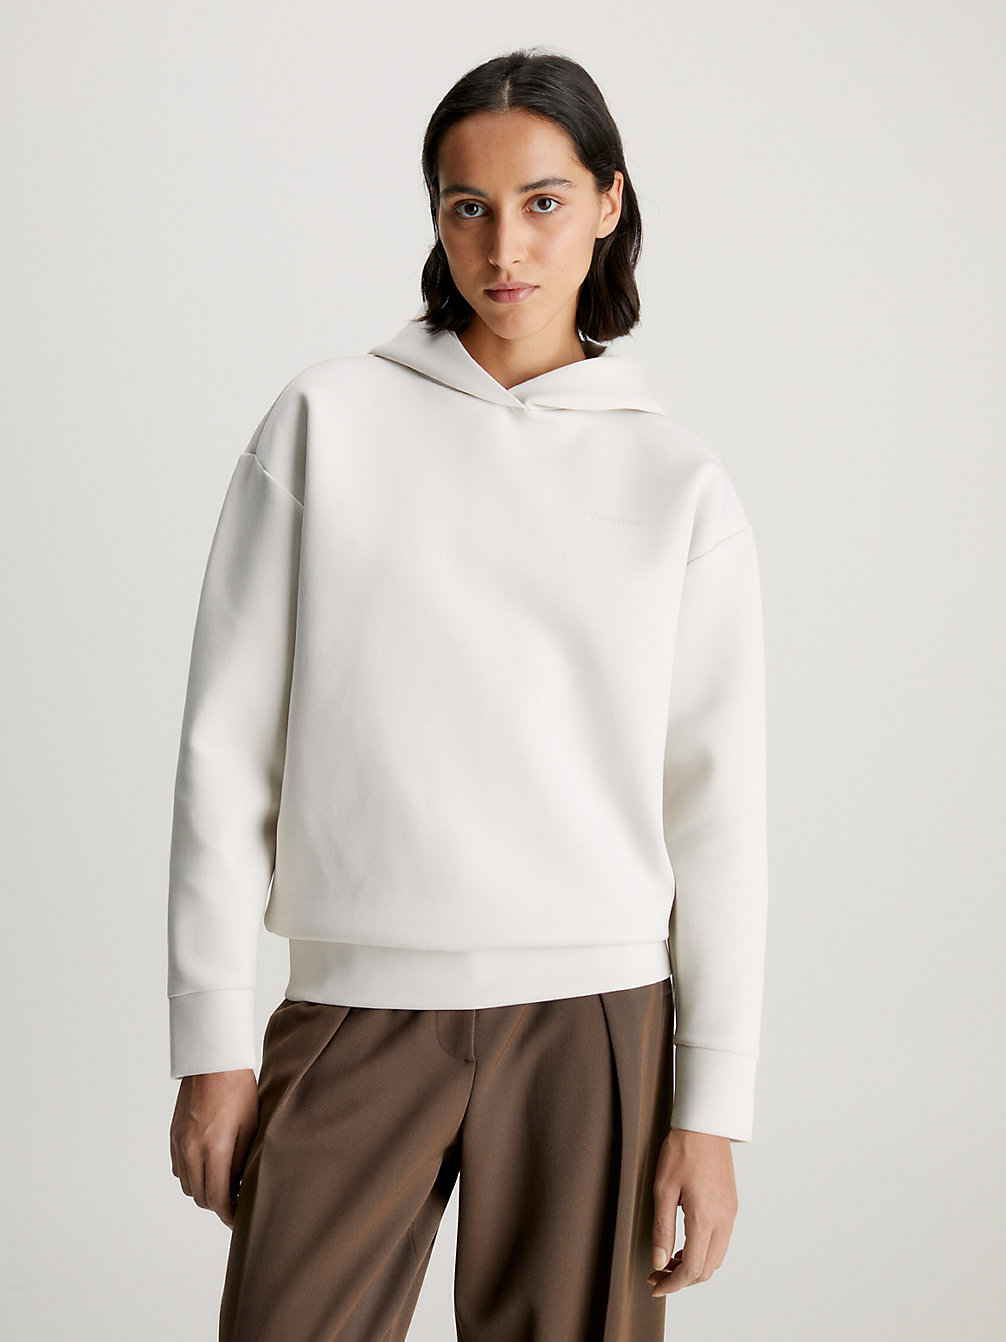 RAINY DAY Relaxed Hoodie undefined women Calvin Klein